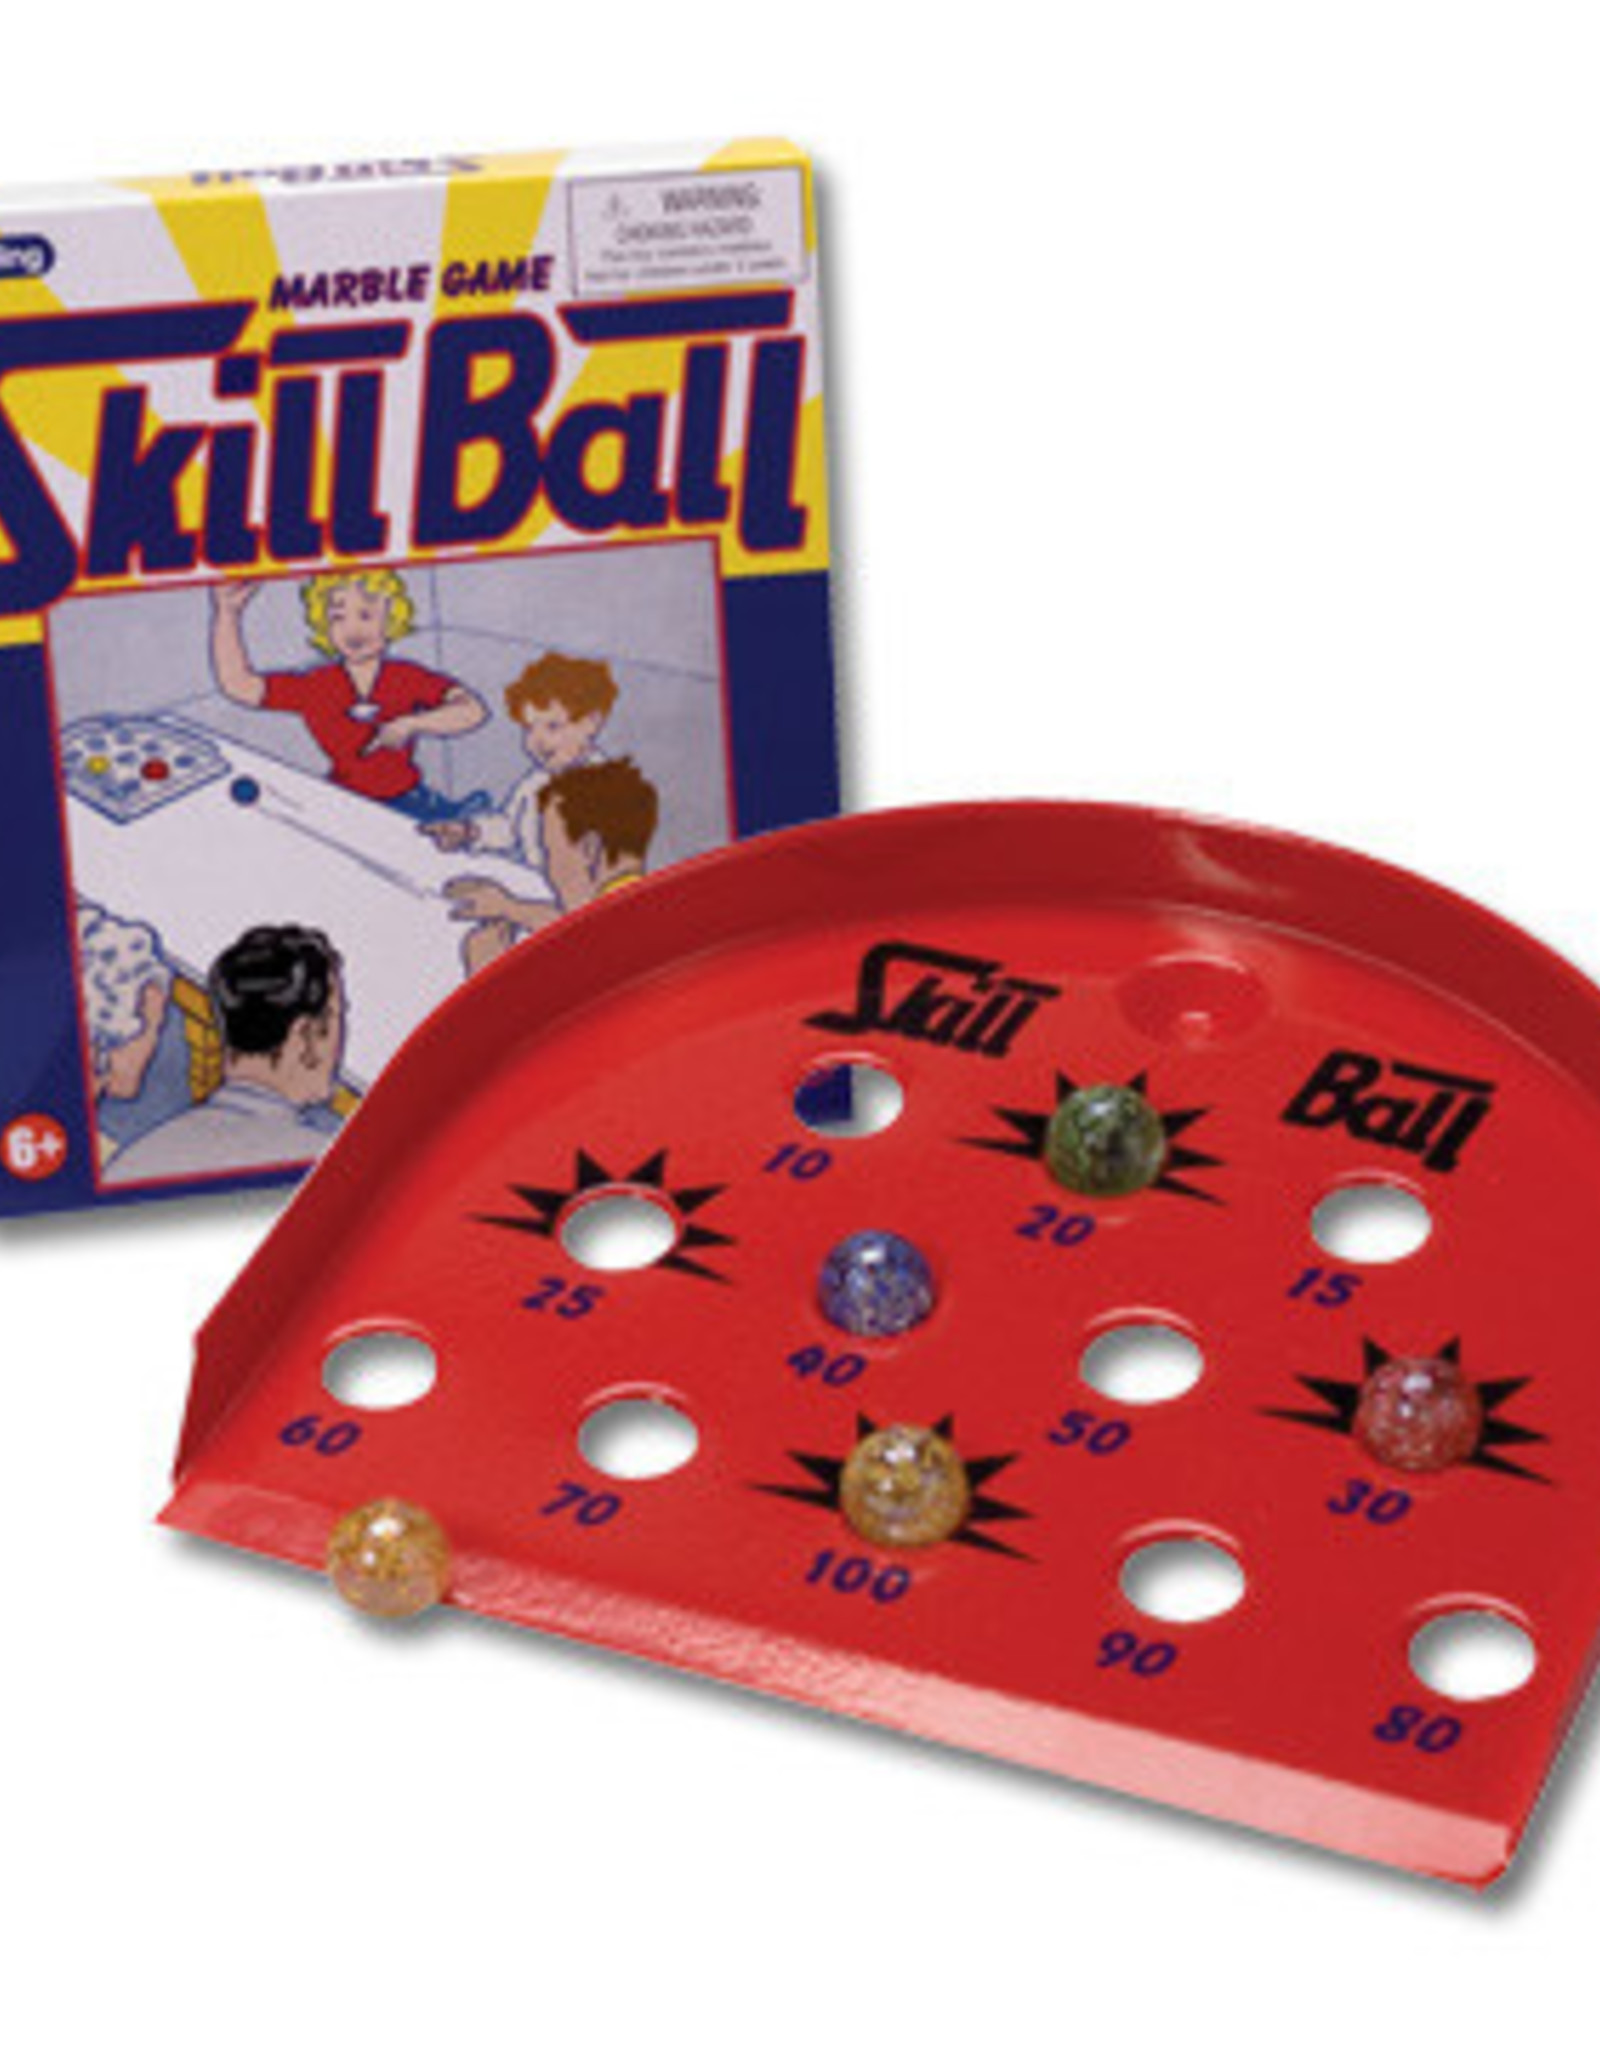 Ball Game - Lets Play: Games & Toys